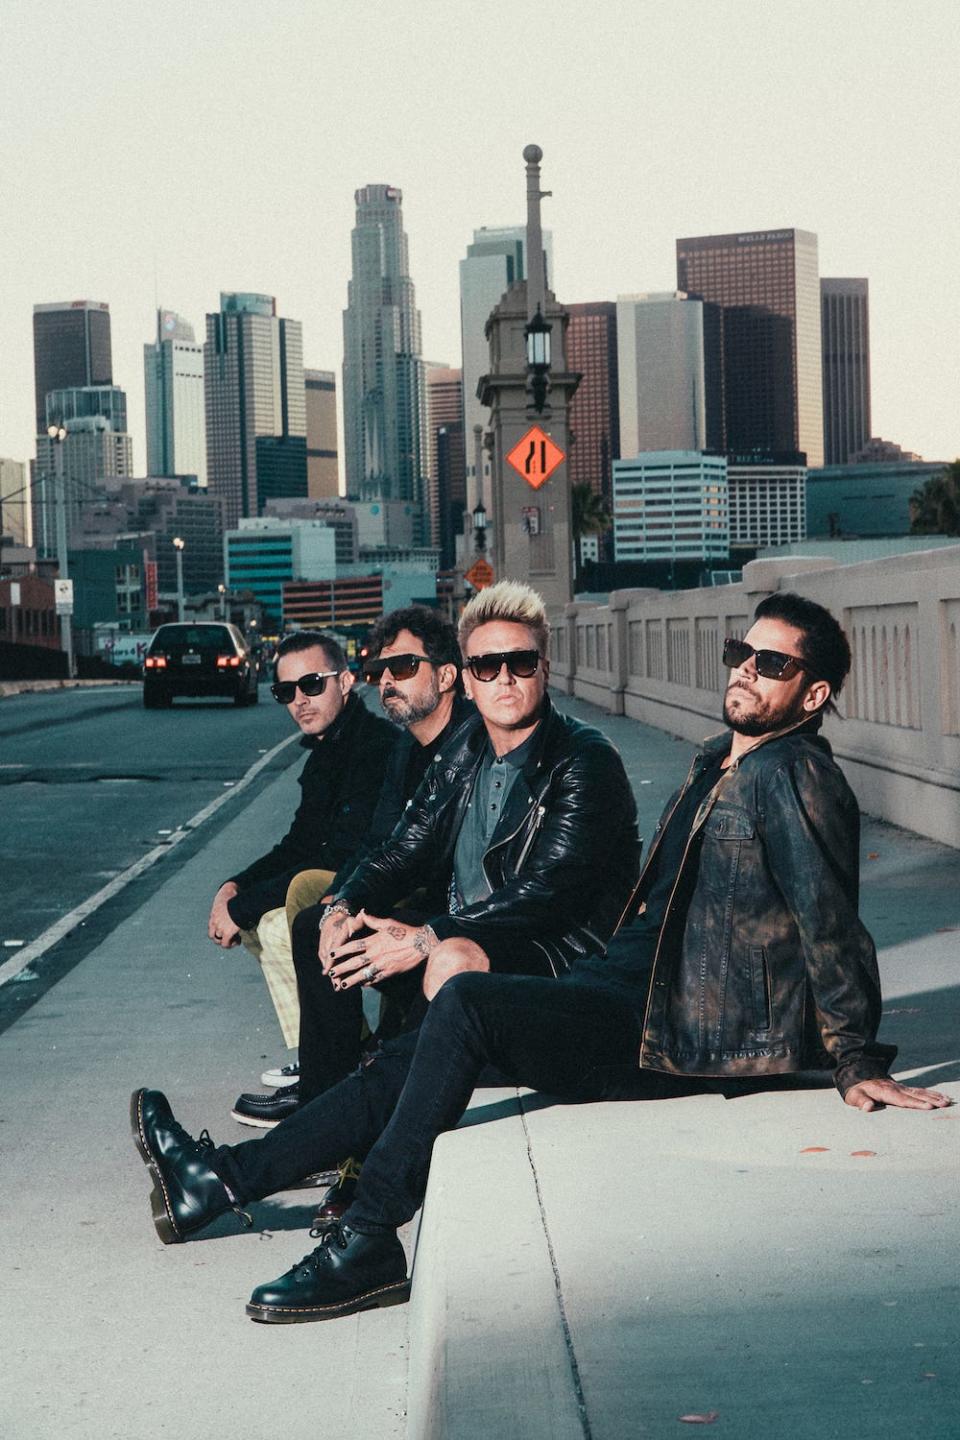 Papa Roach will be joined by Spiritbox at the Lonestar Amphitheater on Oct. 10.